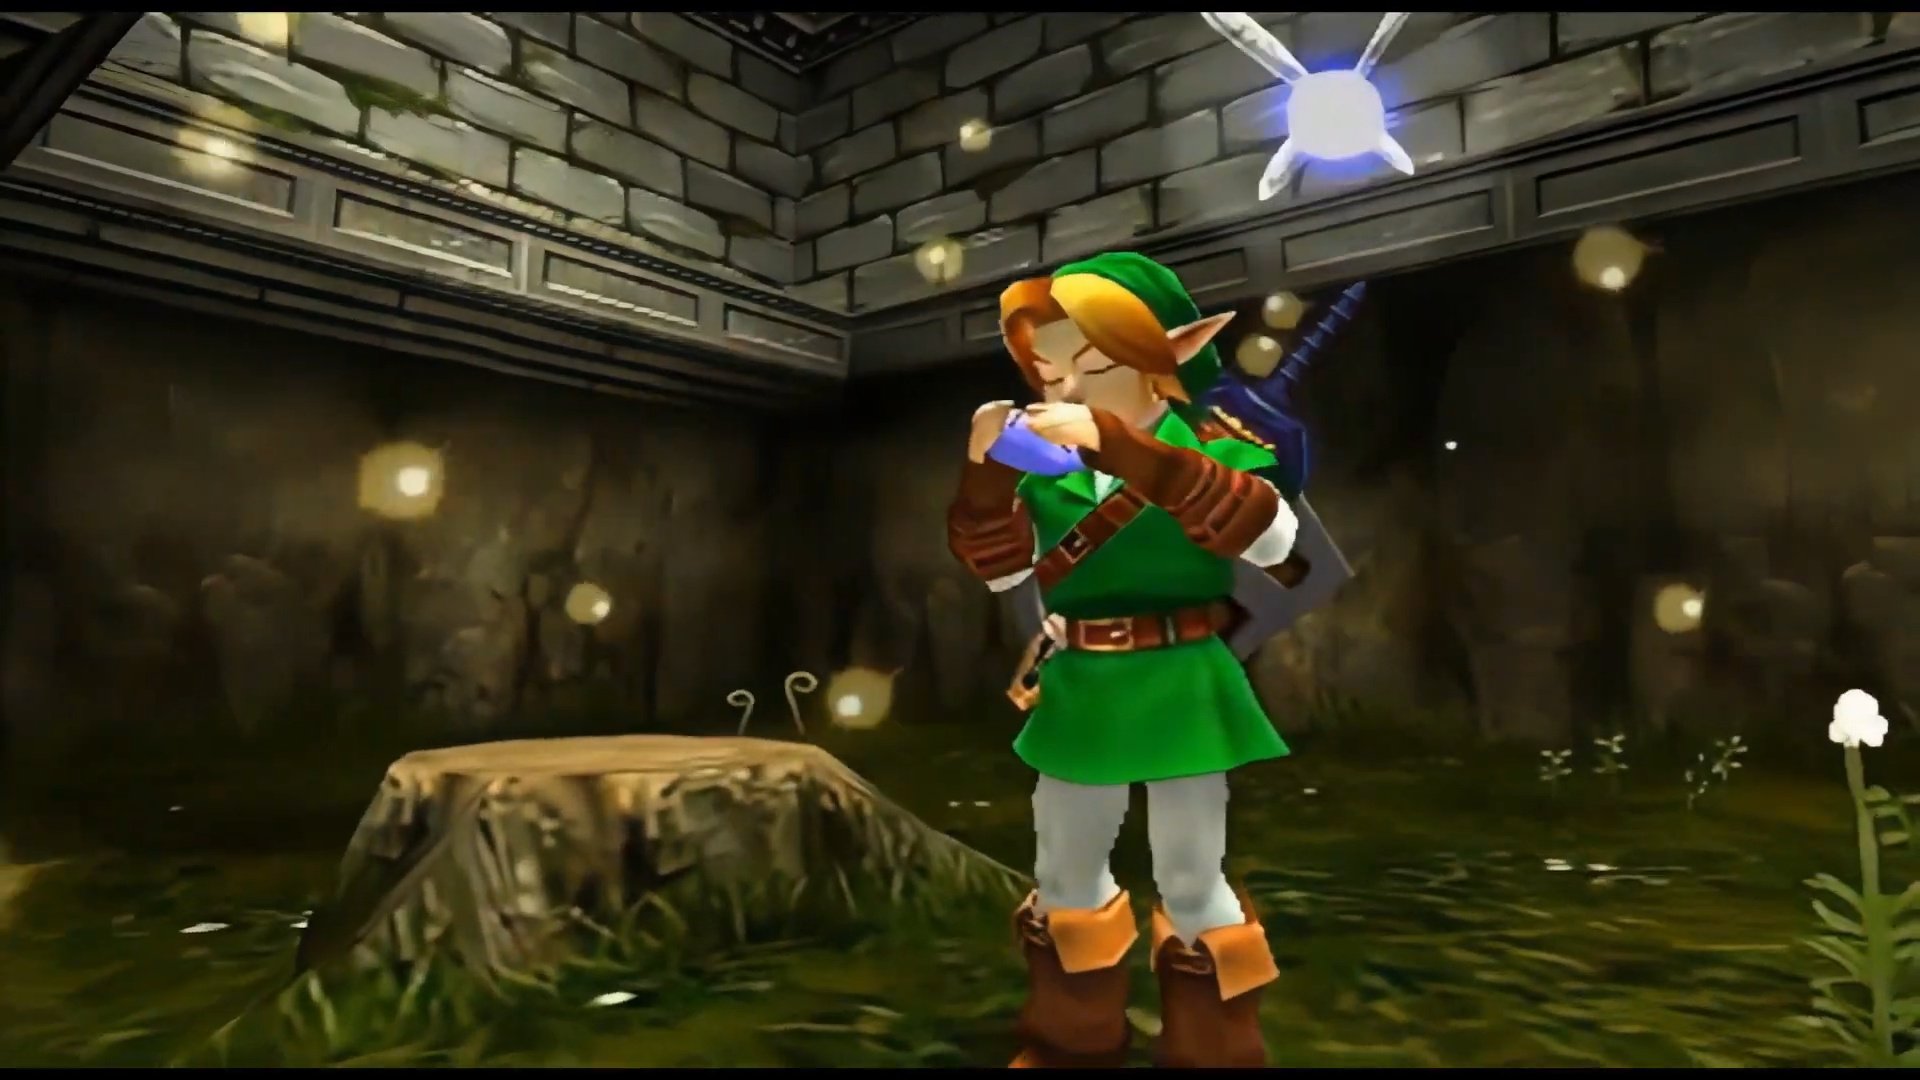 Link's Ocarina of Time design was based on a 'famous Hollywood